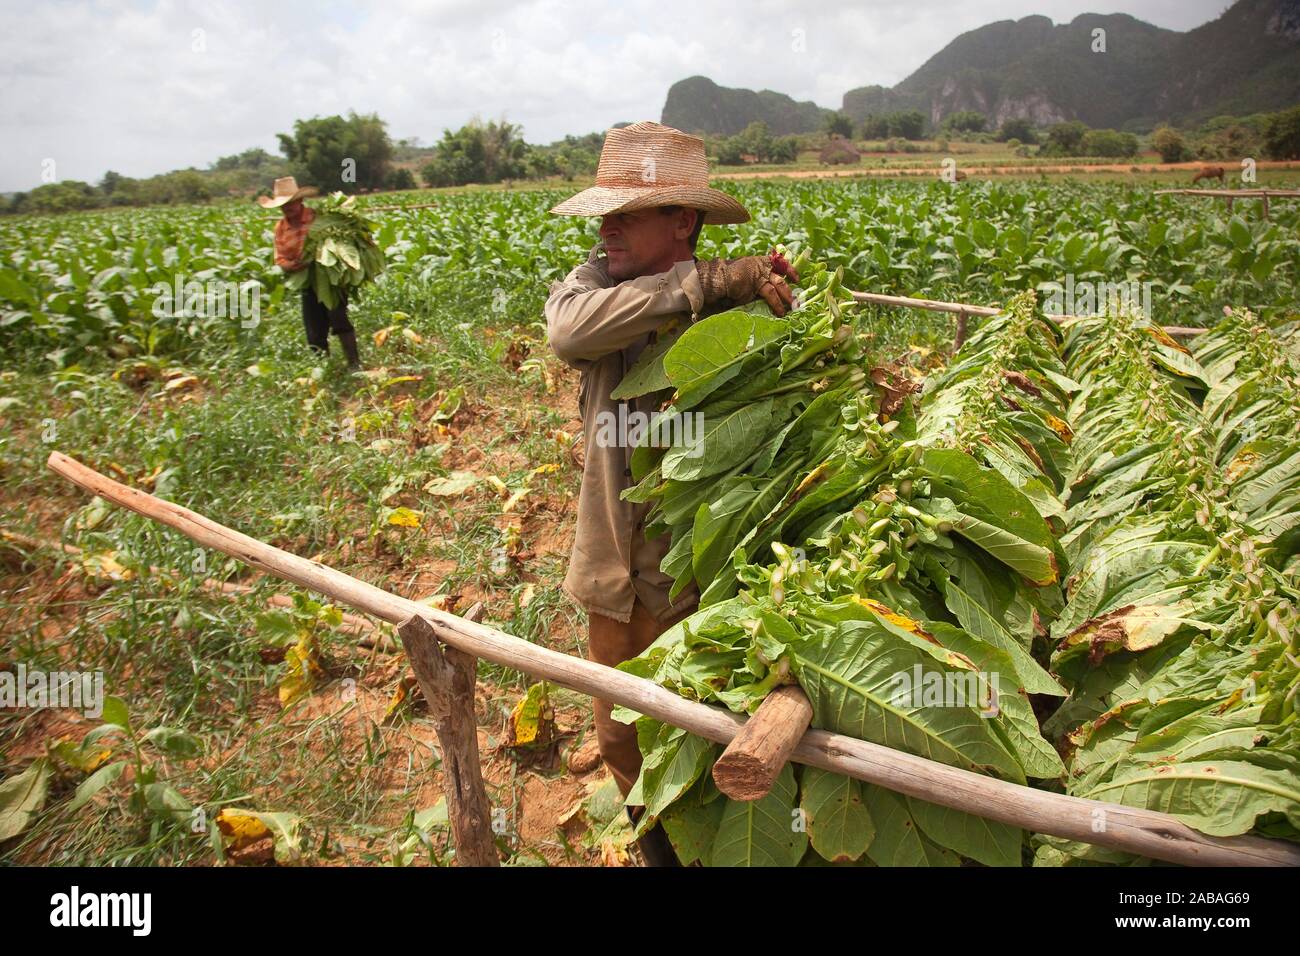 Farmers picking tobacco leaves in the valley, Vinales, Pinar del Rio Province, Cuba, Central America Stock Photo